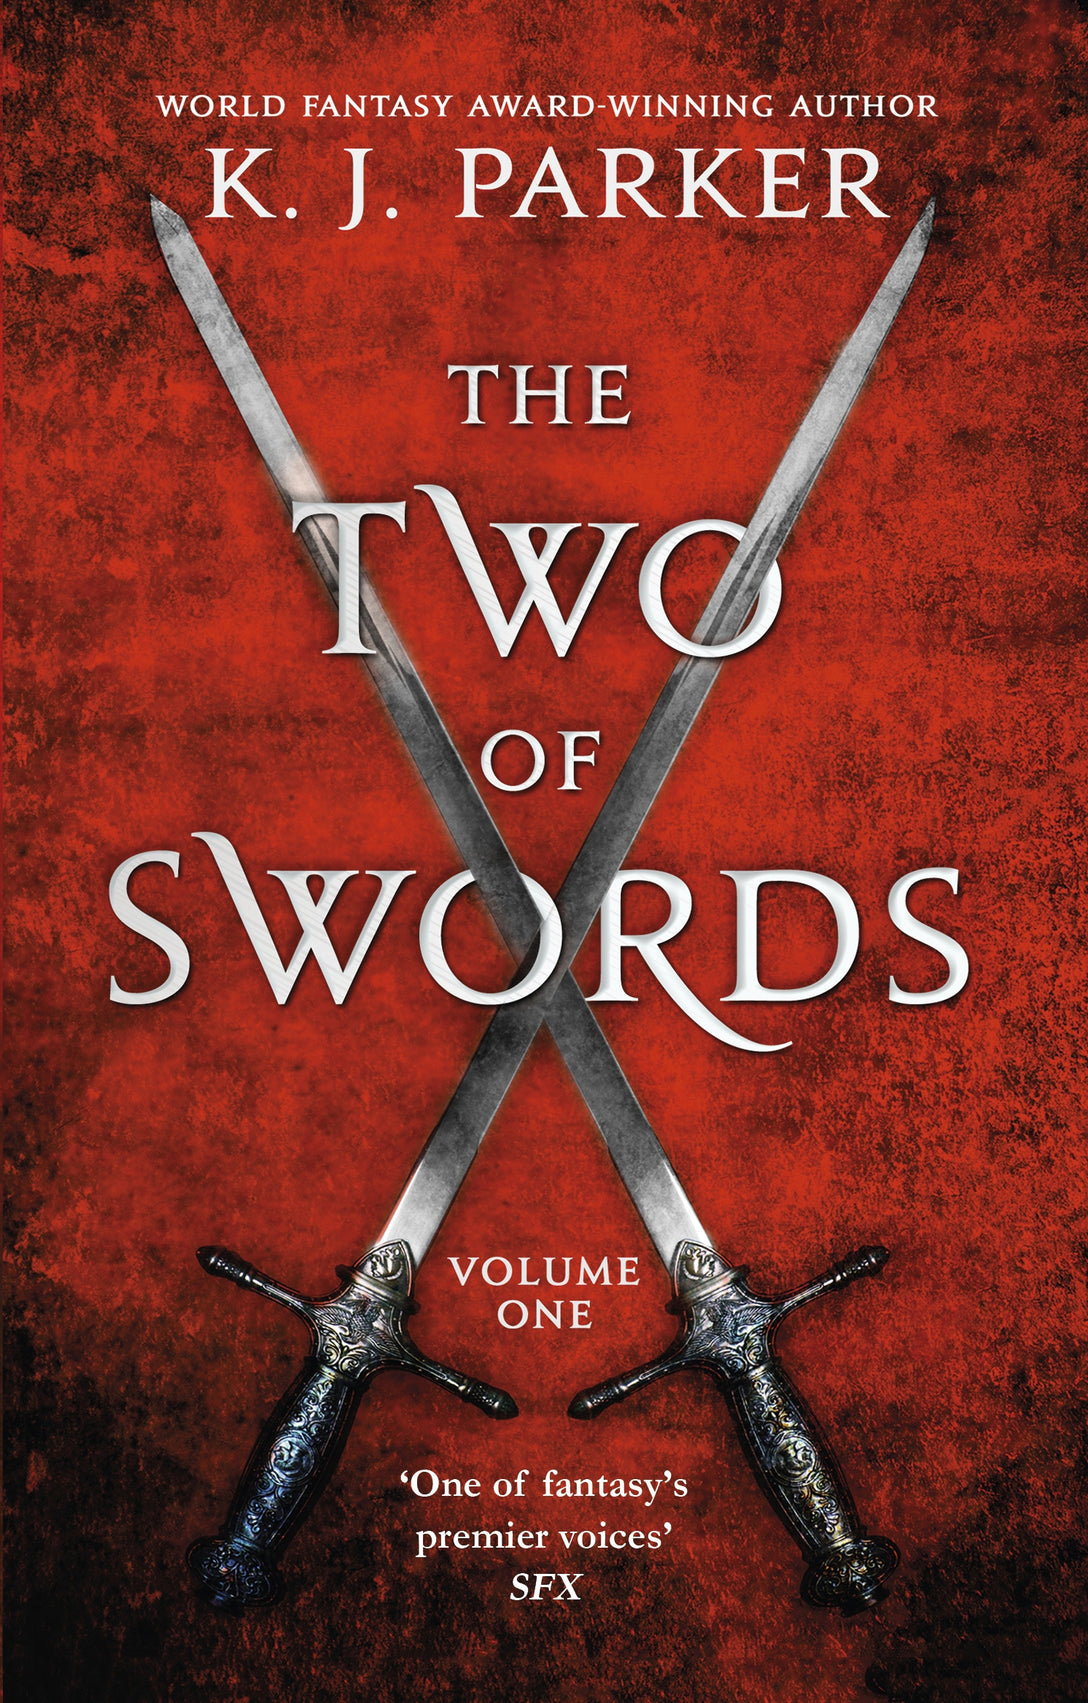 The Two of Swords: Volume One by K. J. Parker